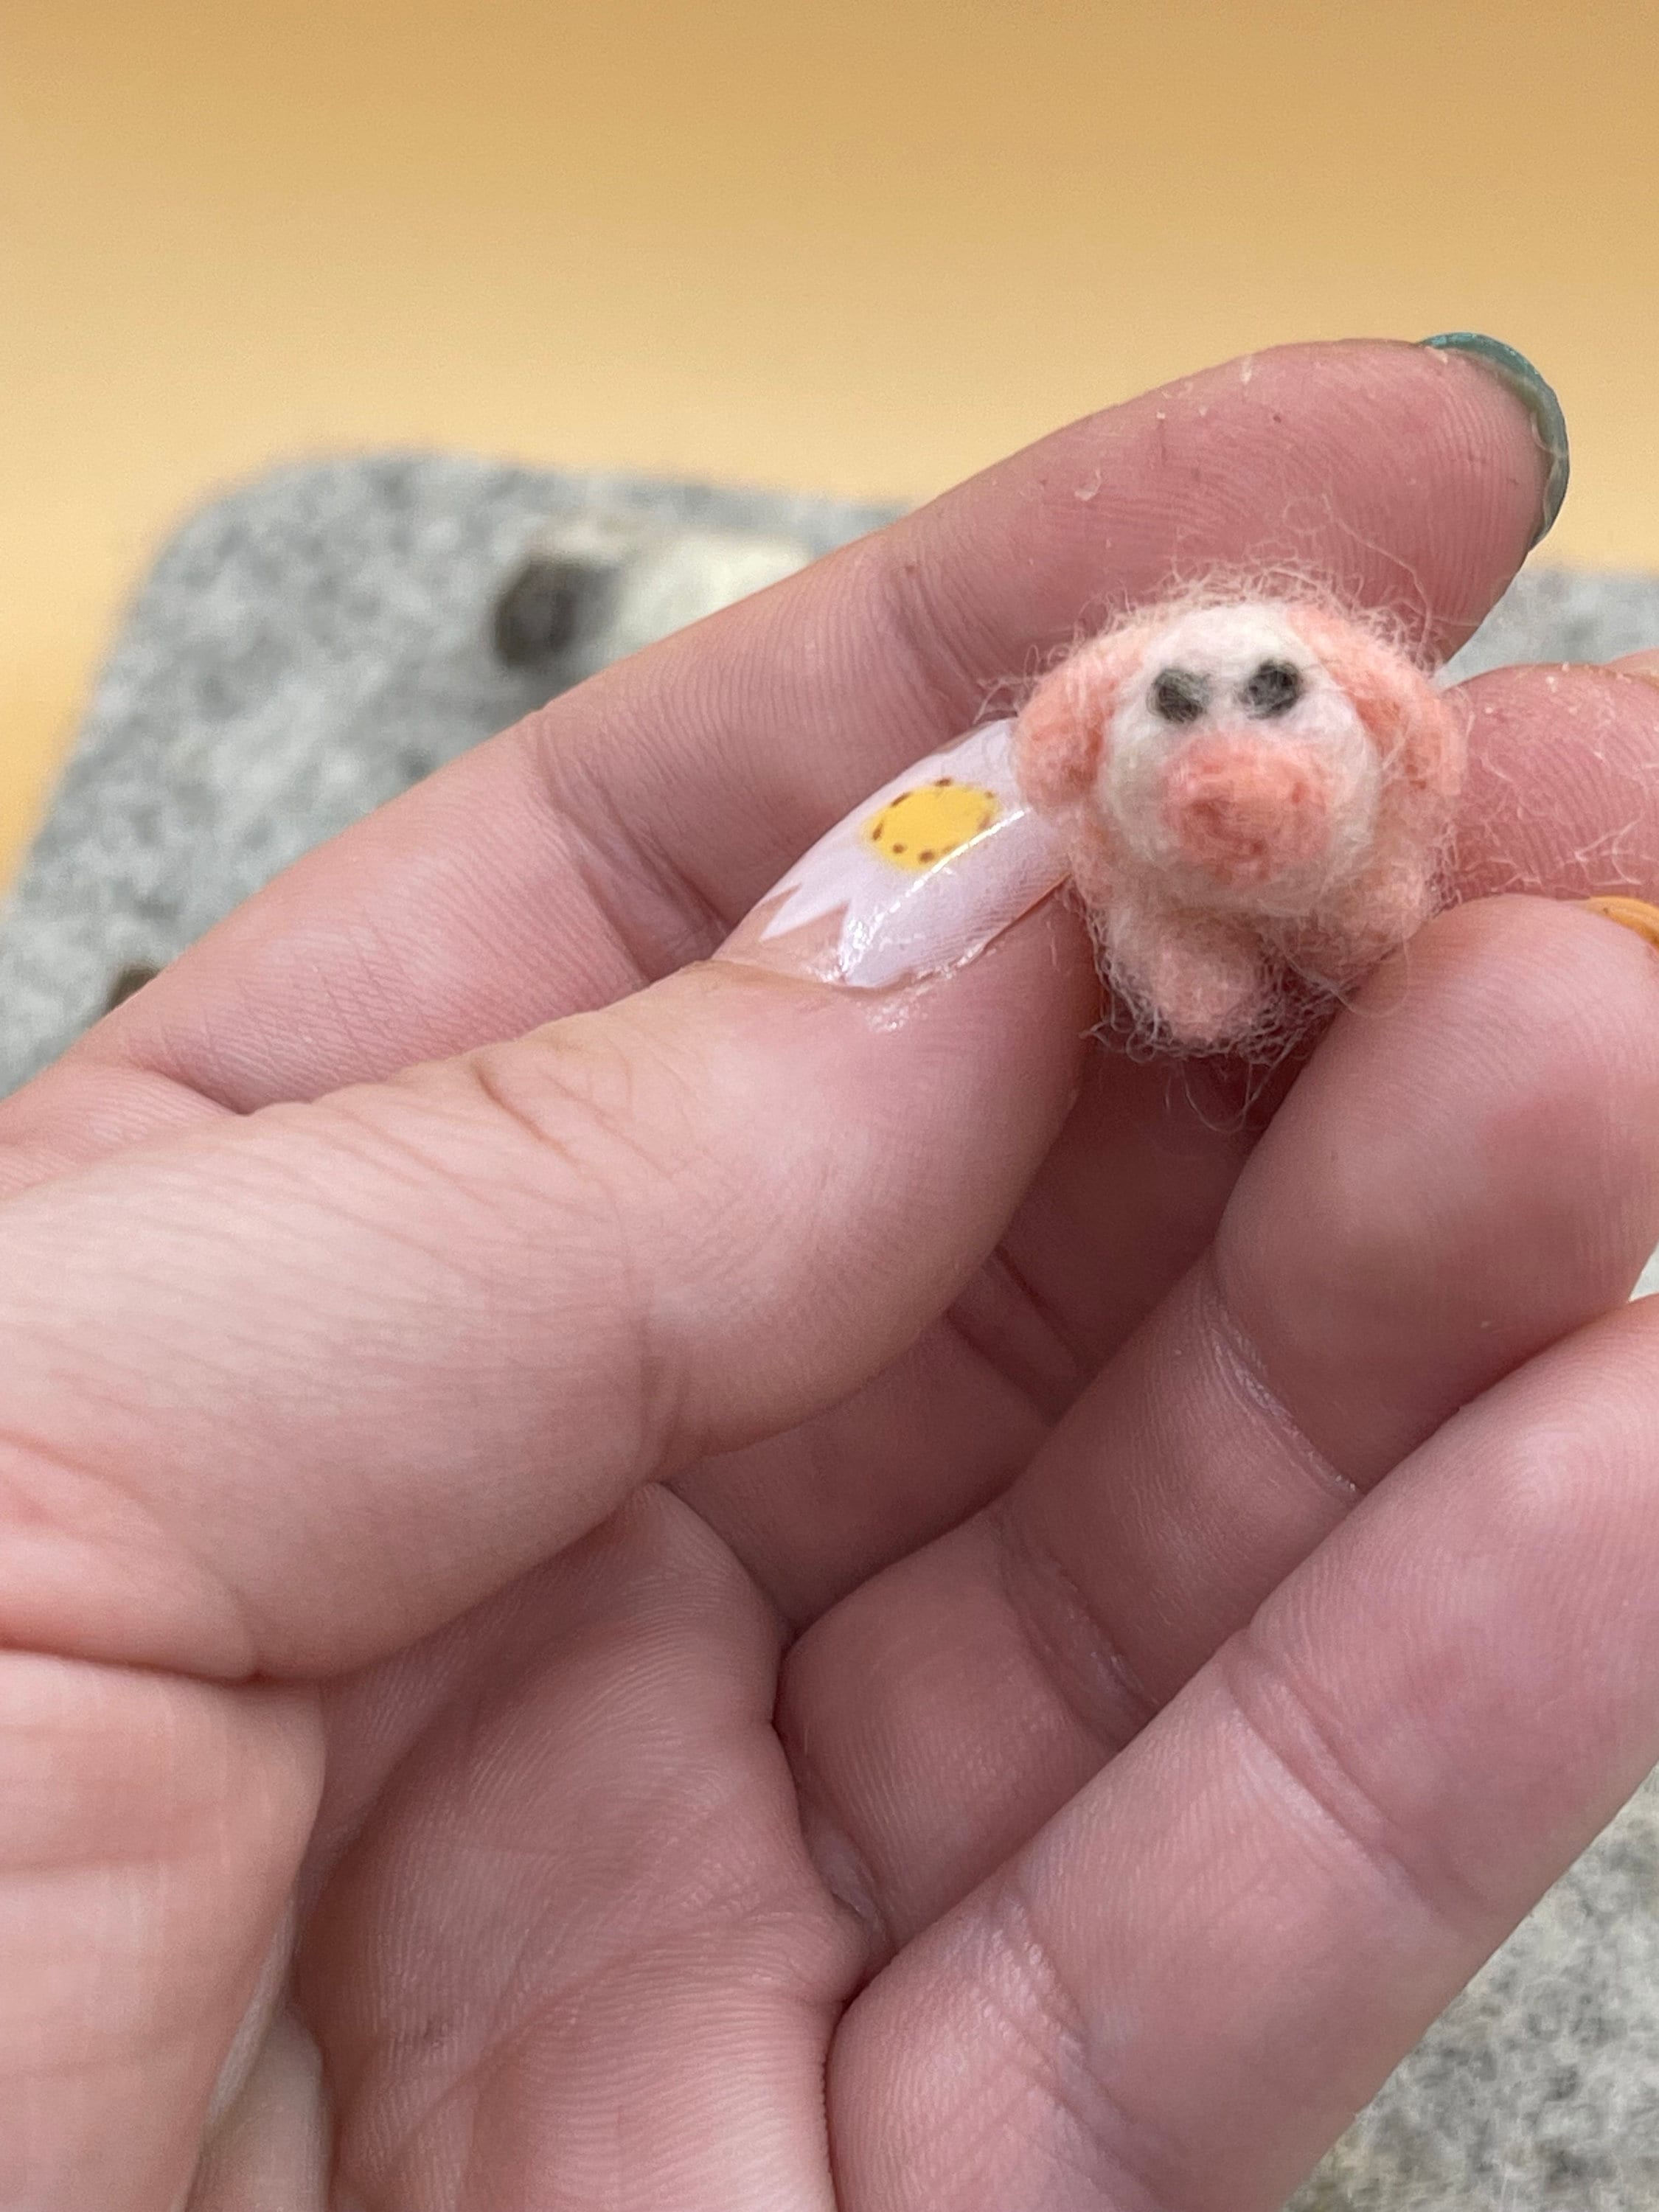 Handmade White Mouse in Clothes, Cute Felt Mouse for a Dollhouse, Needle  Felted Animals 